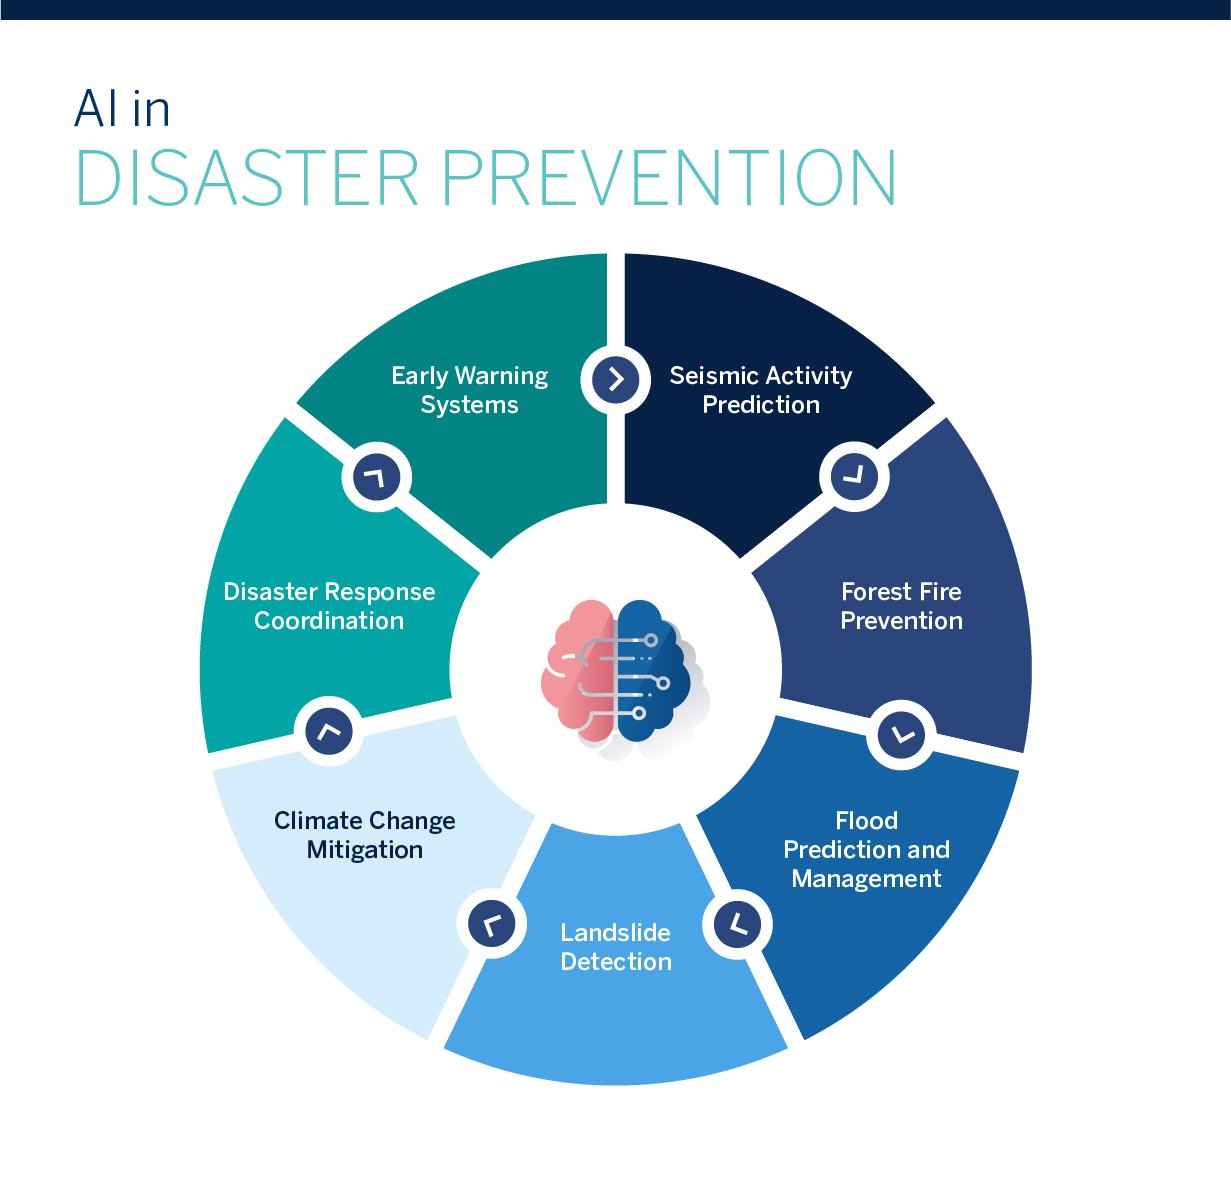 Can AI Help in Predicting and Managing Natural Disasters Effectively?